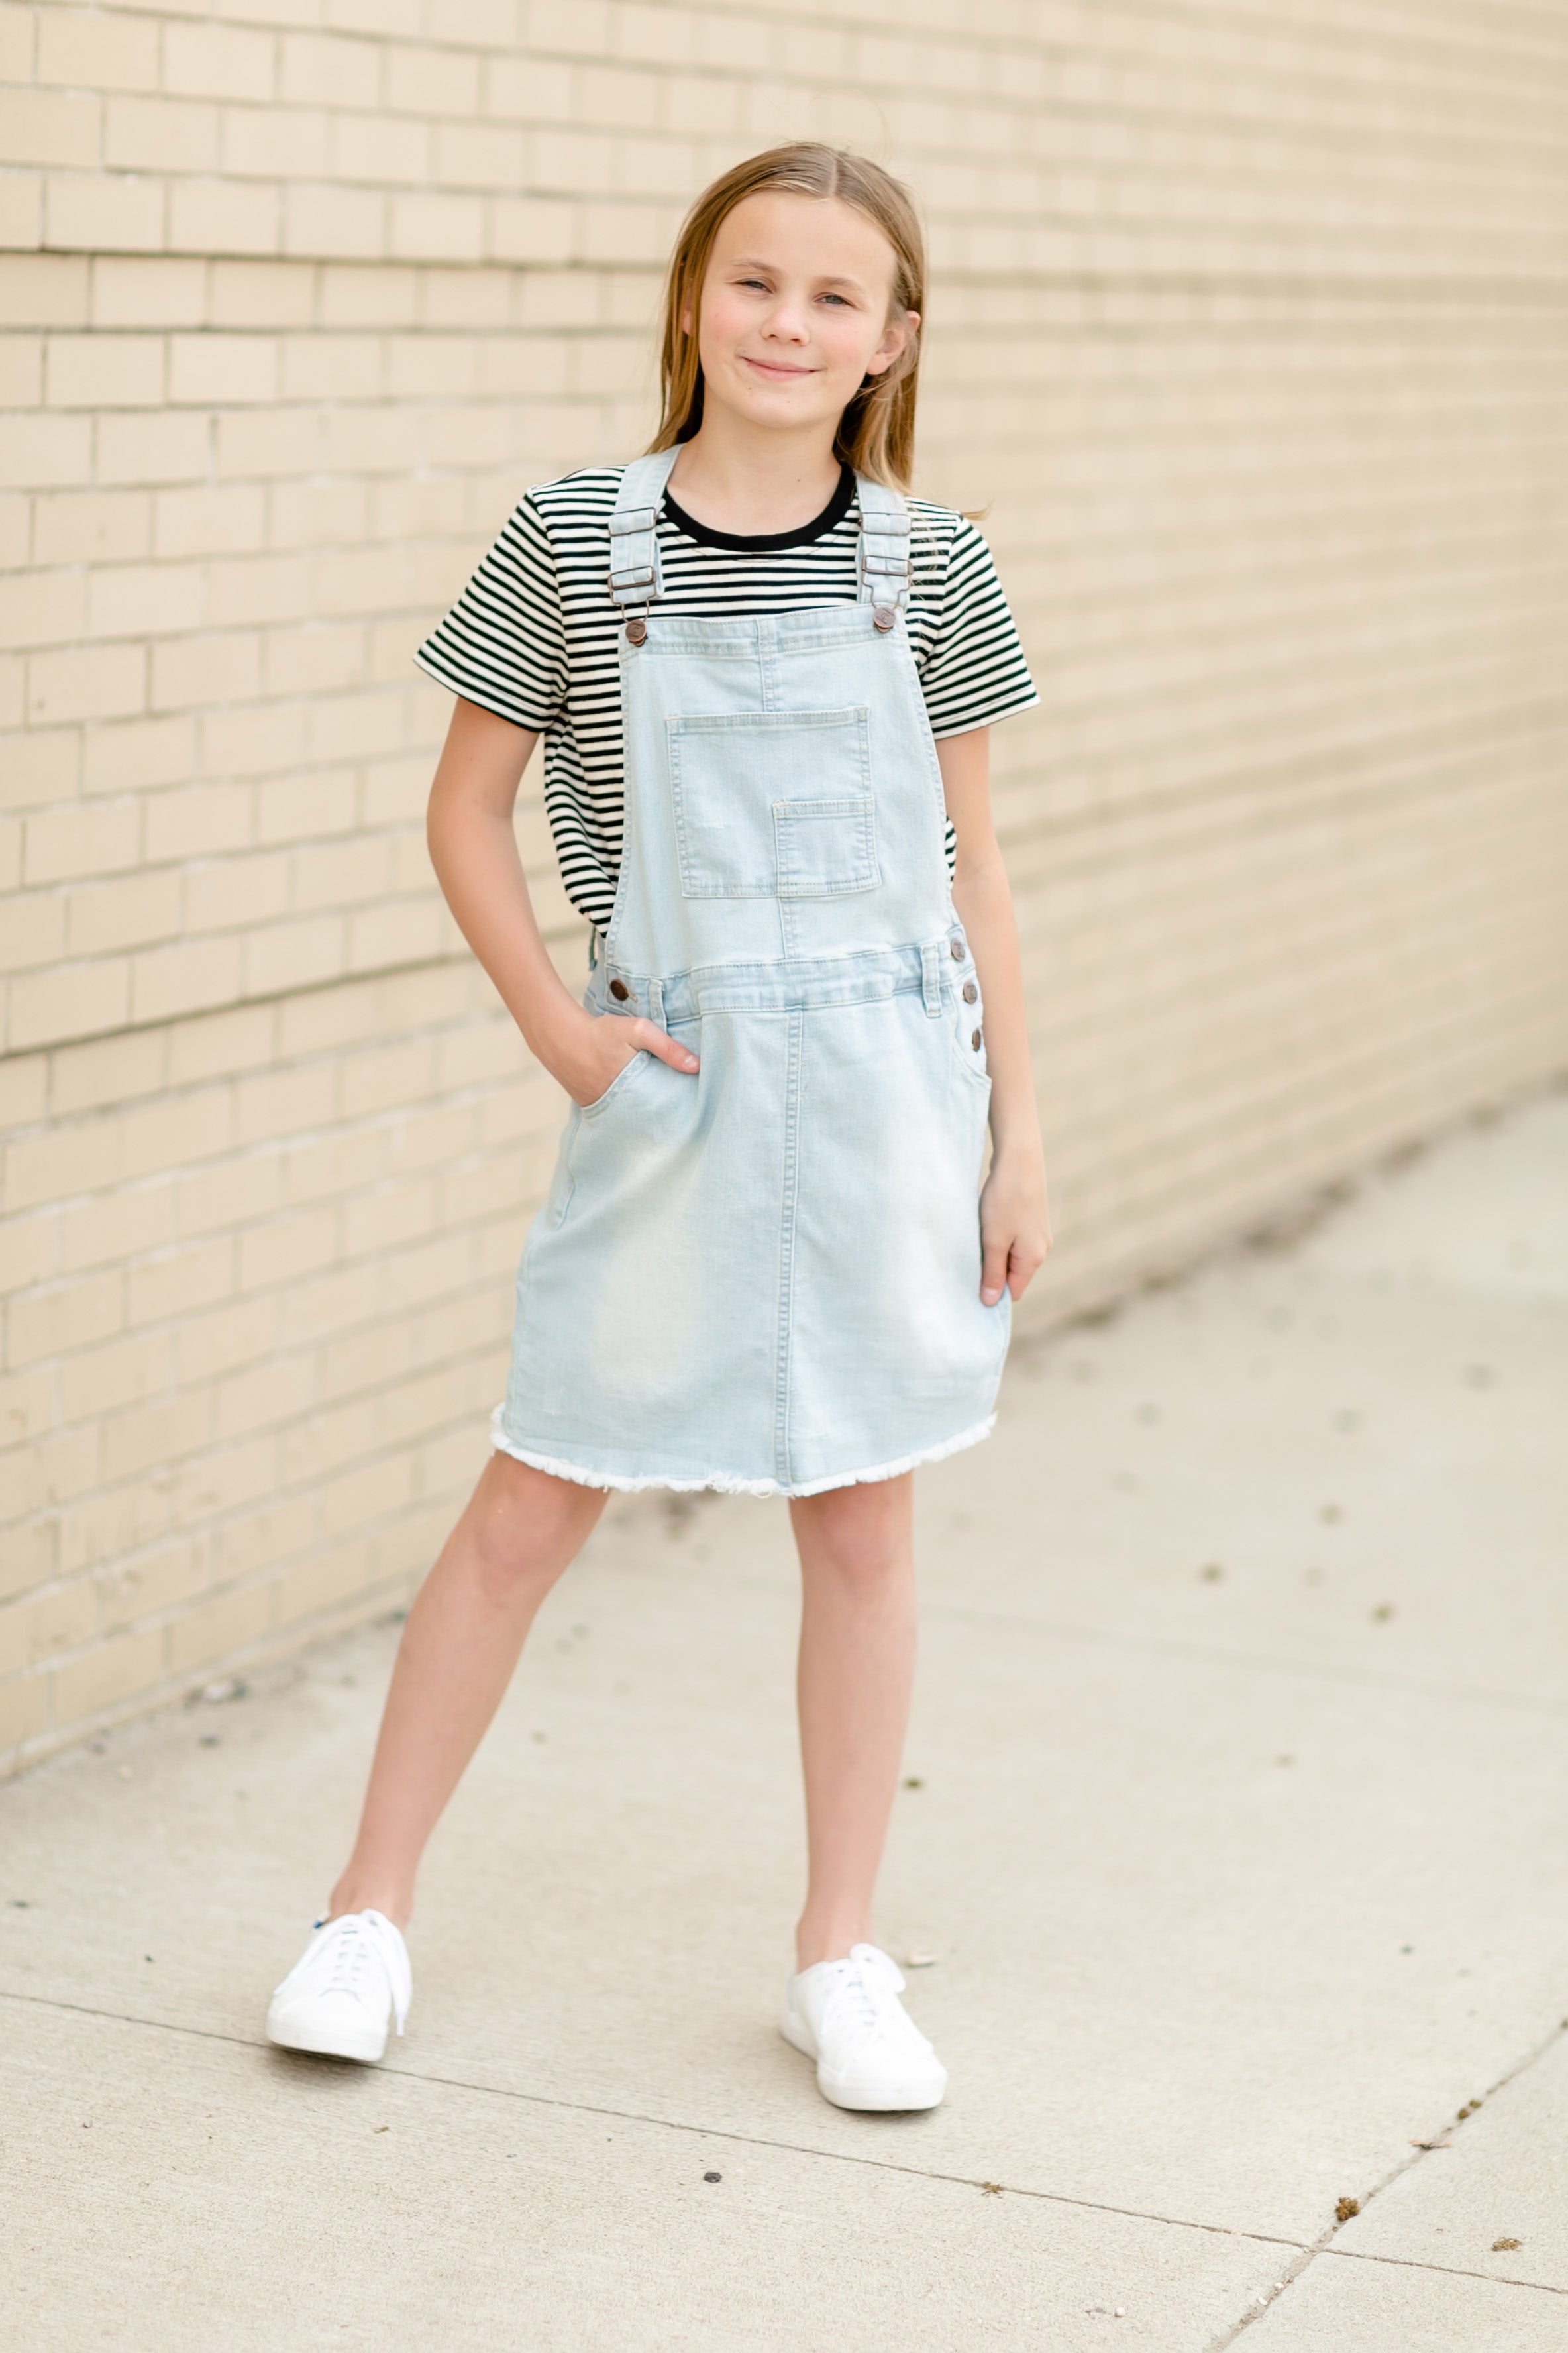 Top more than 222 dungaree dress for girl super hot